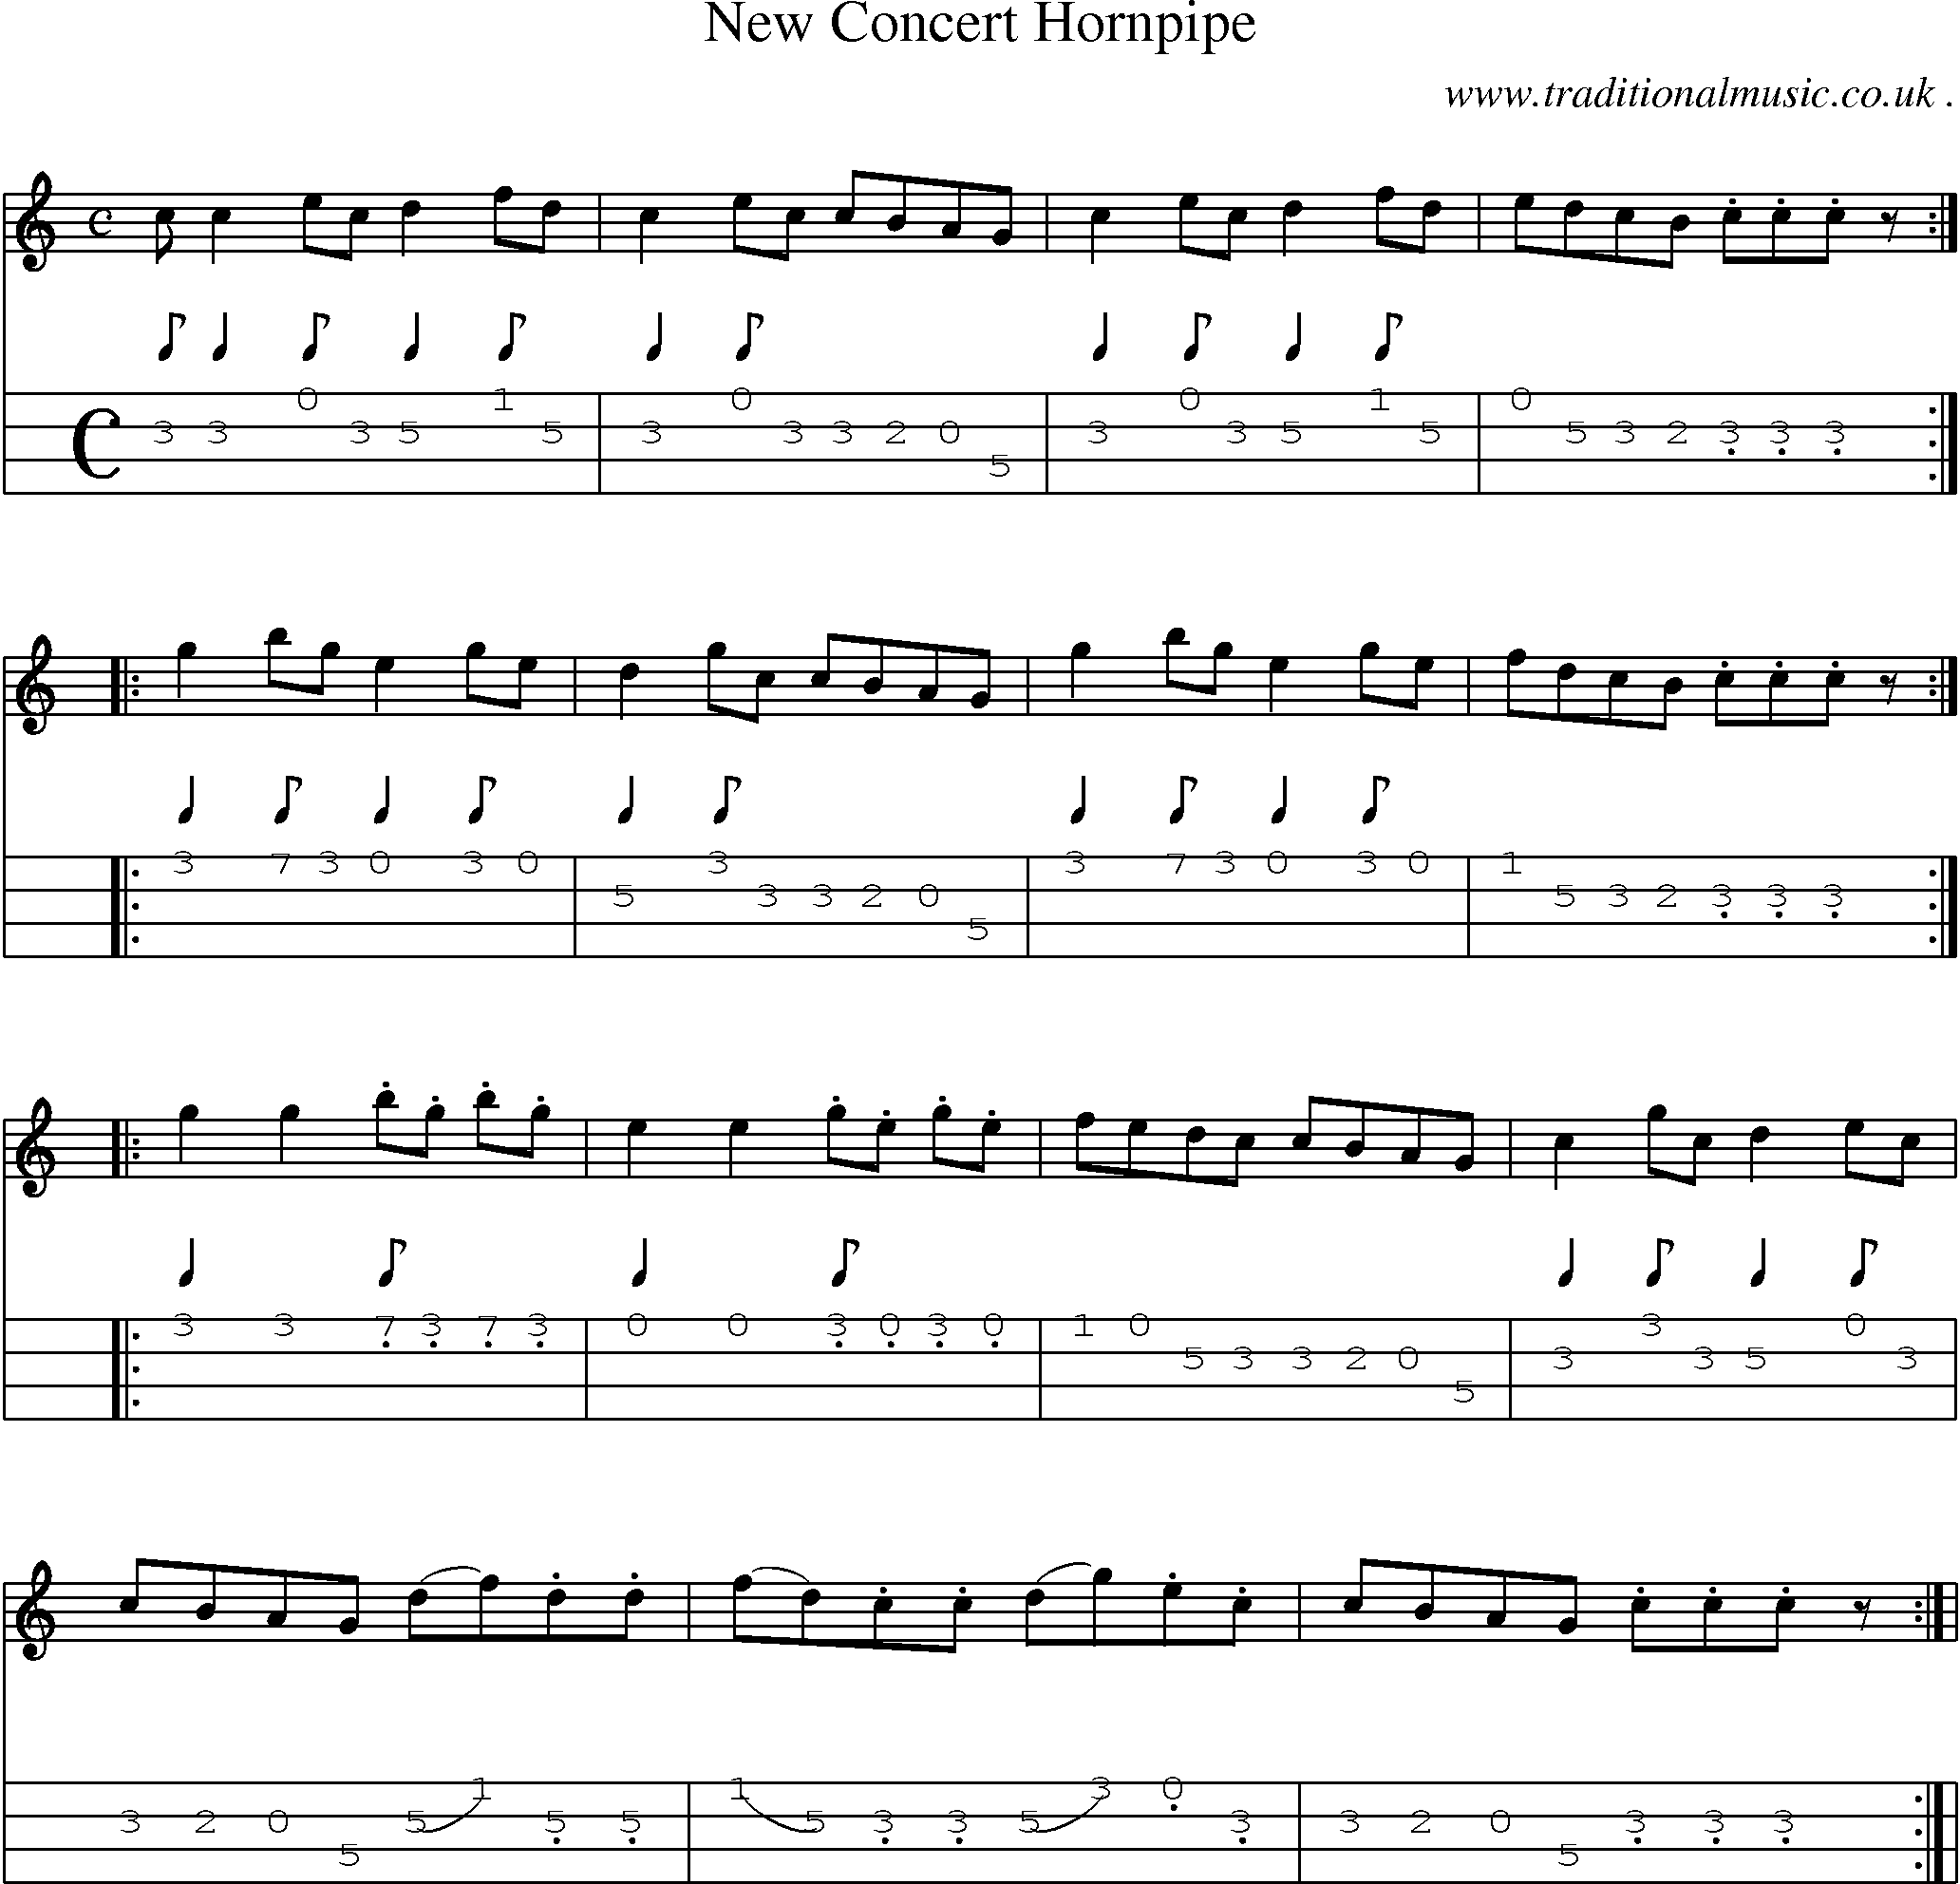 Sheet-Music and Mandolin Tabs for New Concert Hornpipe